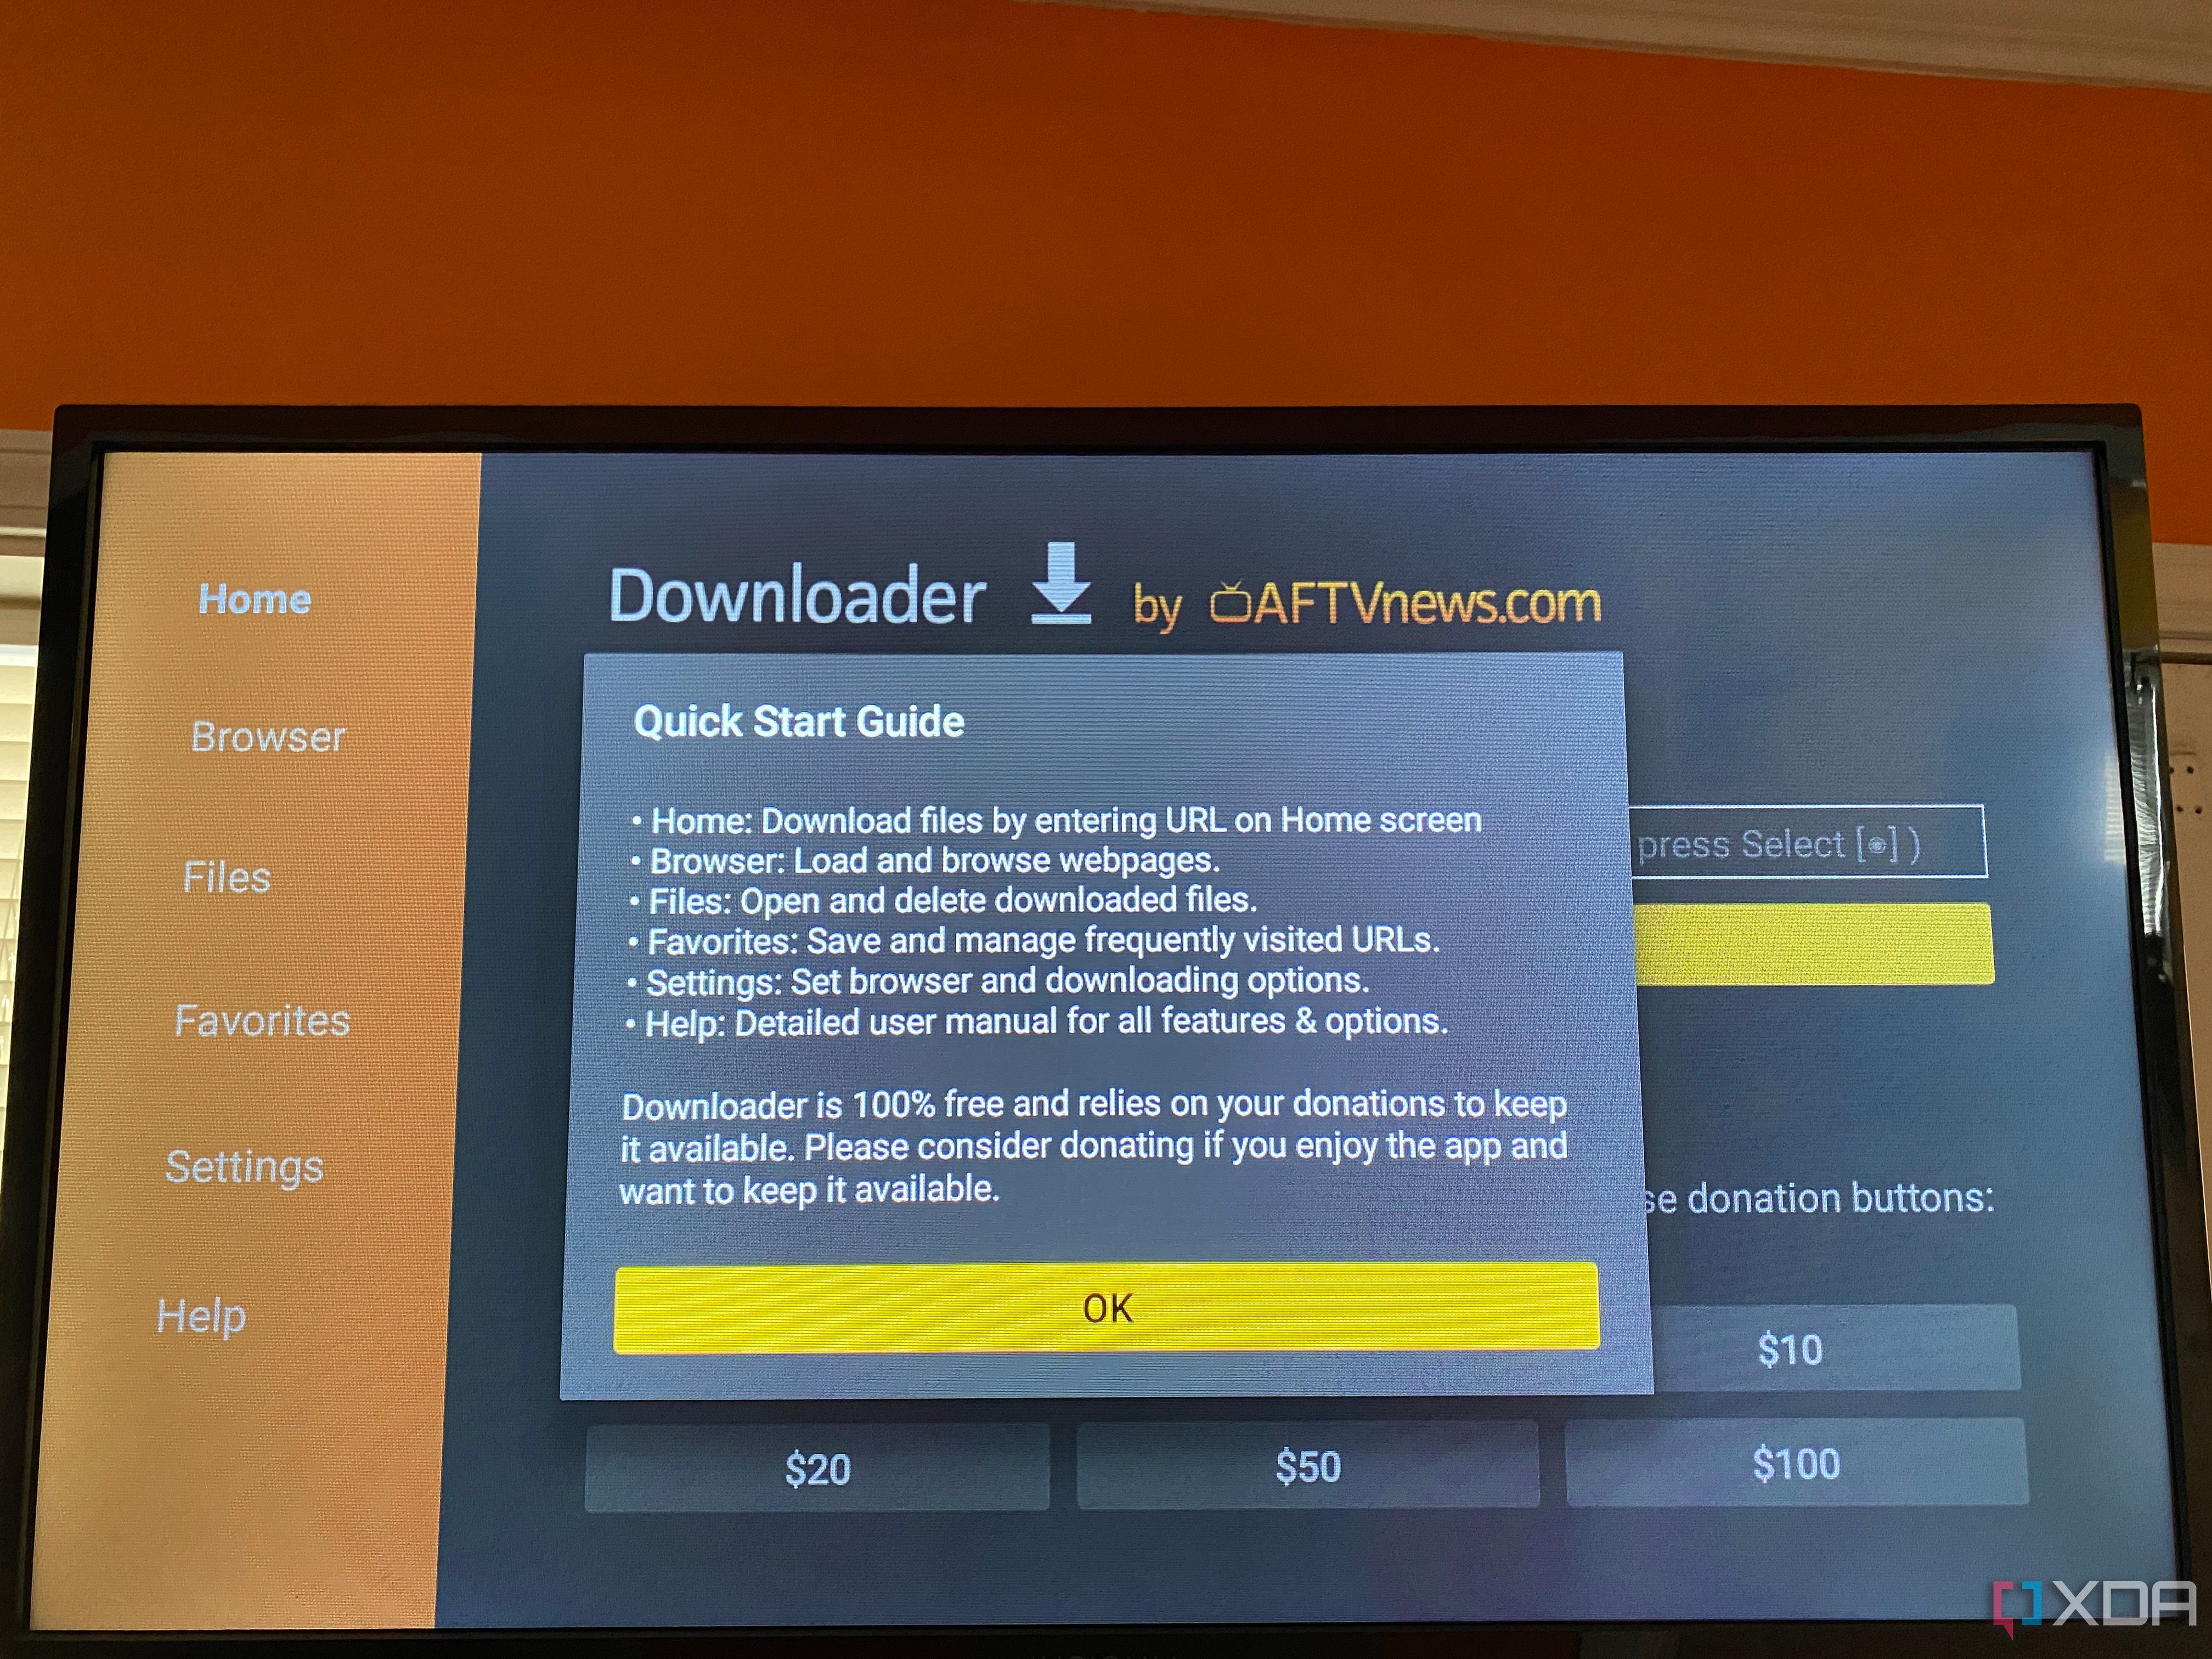 Amazon Fire TV running Downloader app for first time with popups